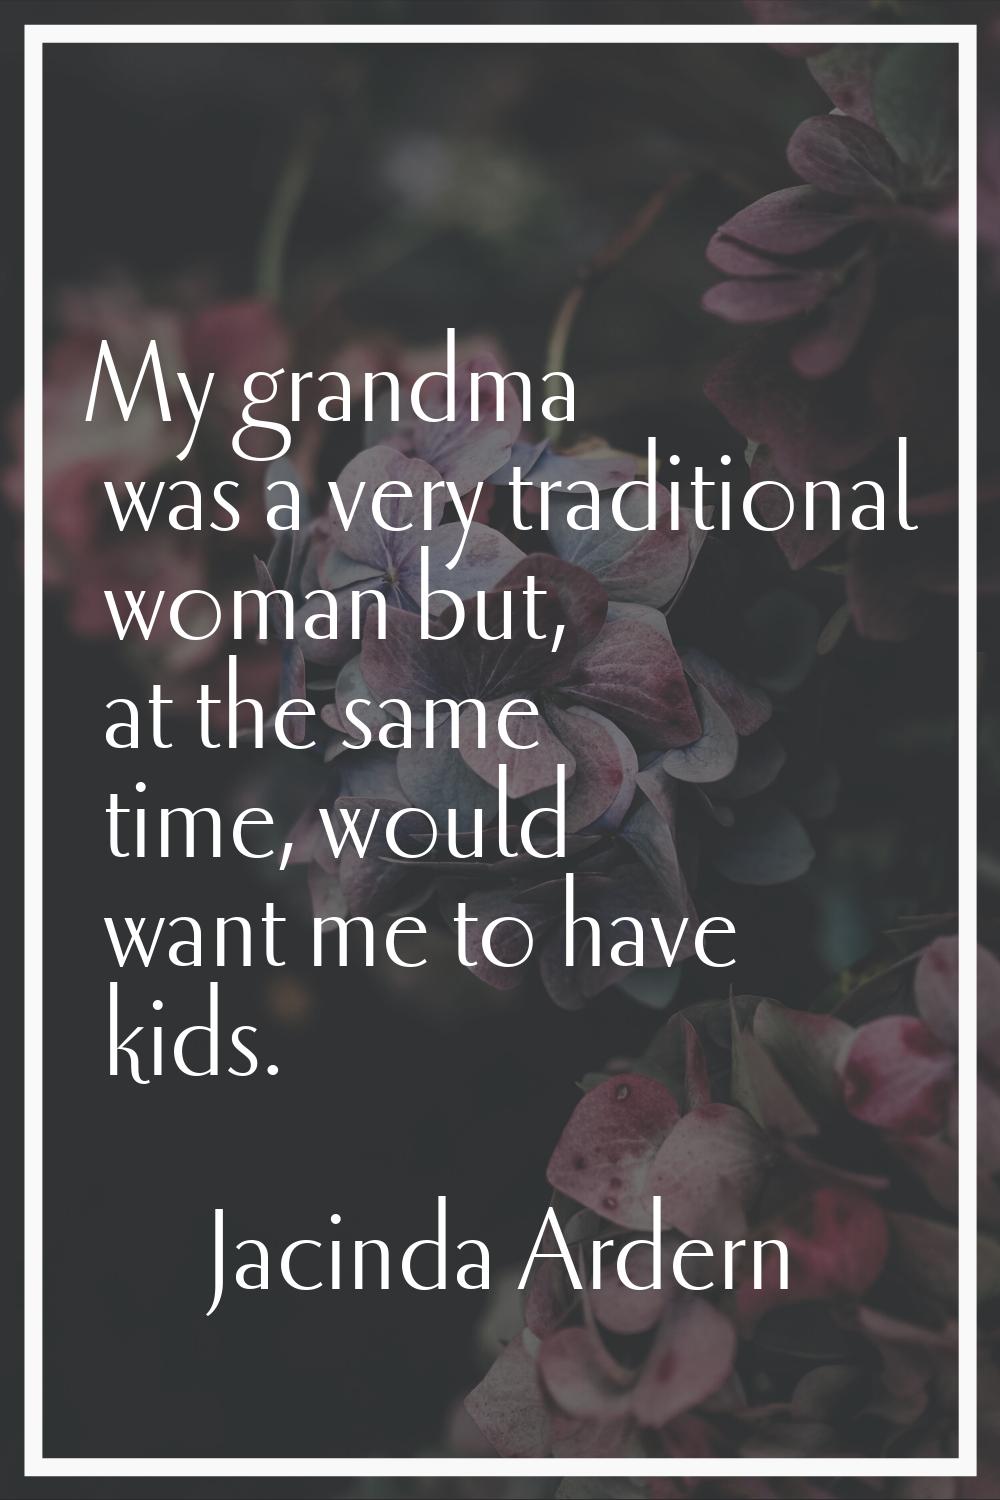 My grandma was a very traditional woman but, at the same time, would want me to have kids.